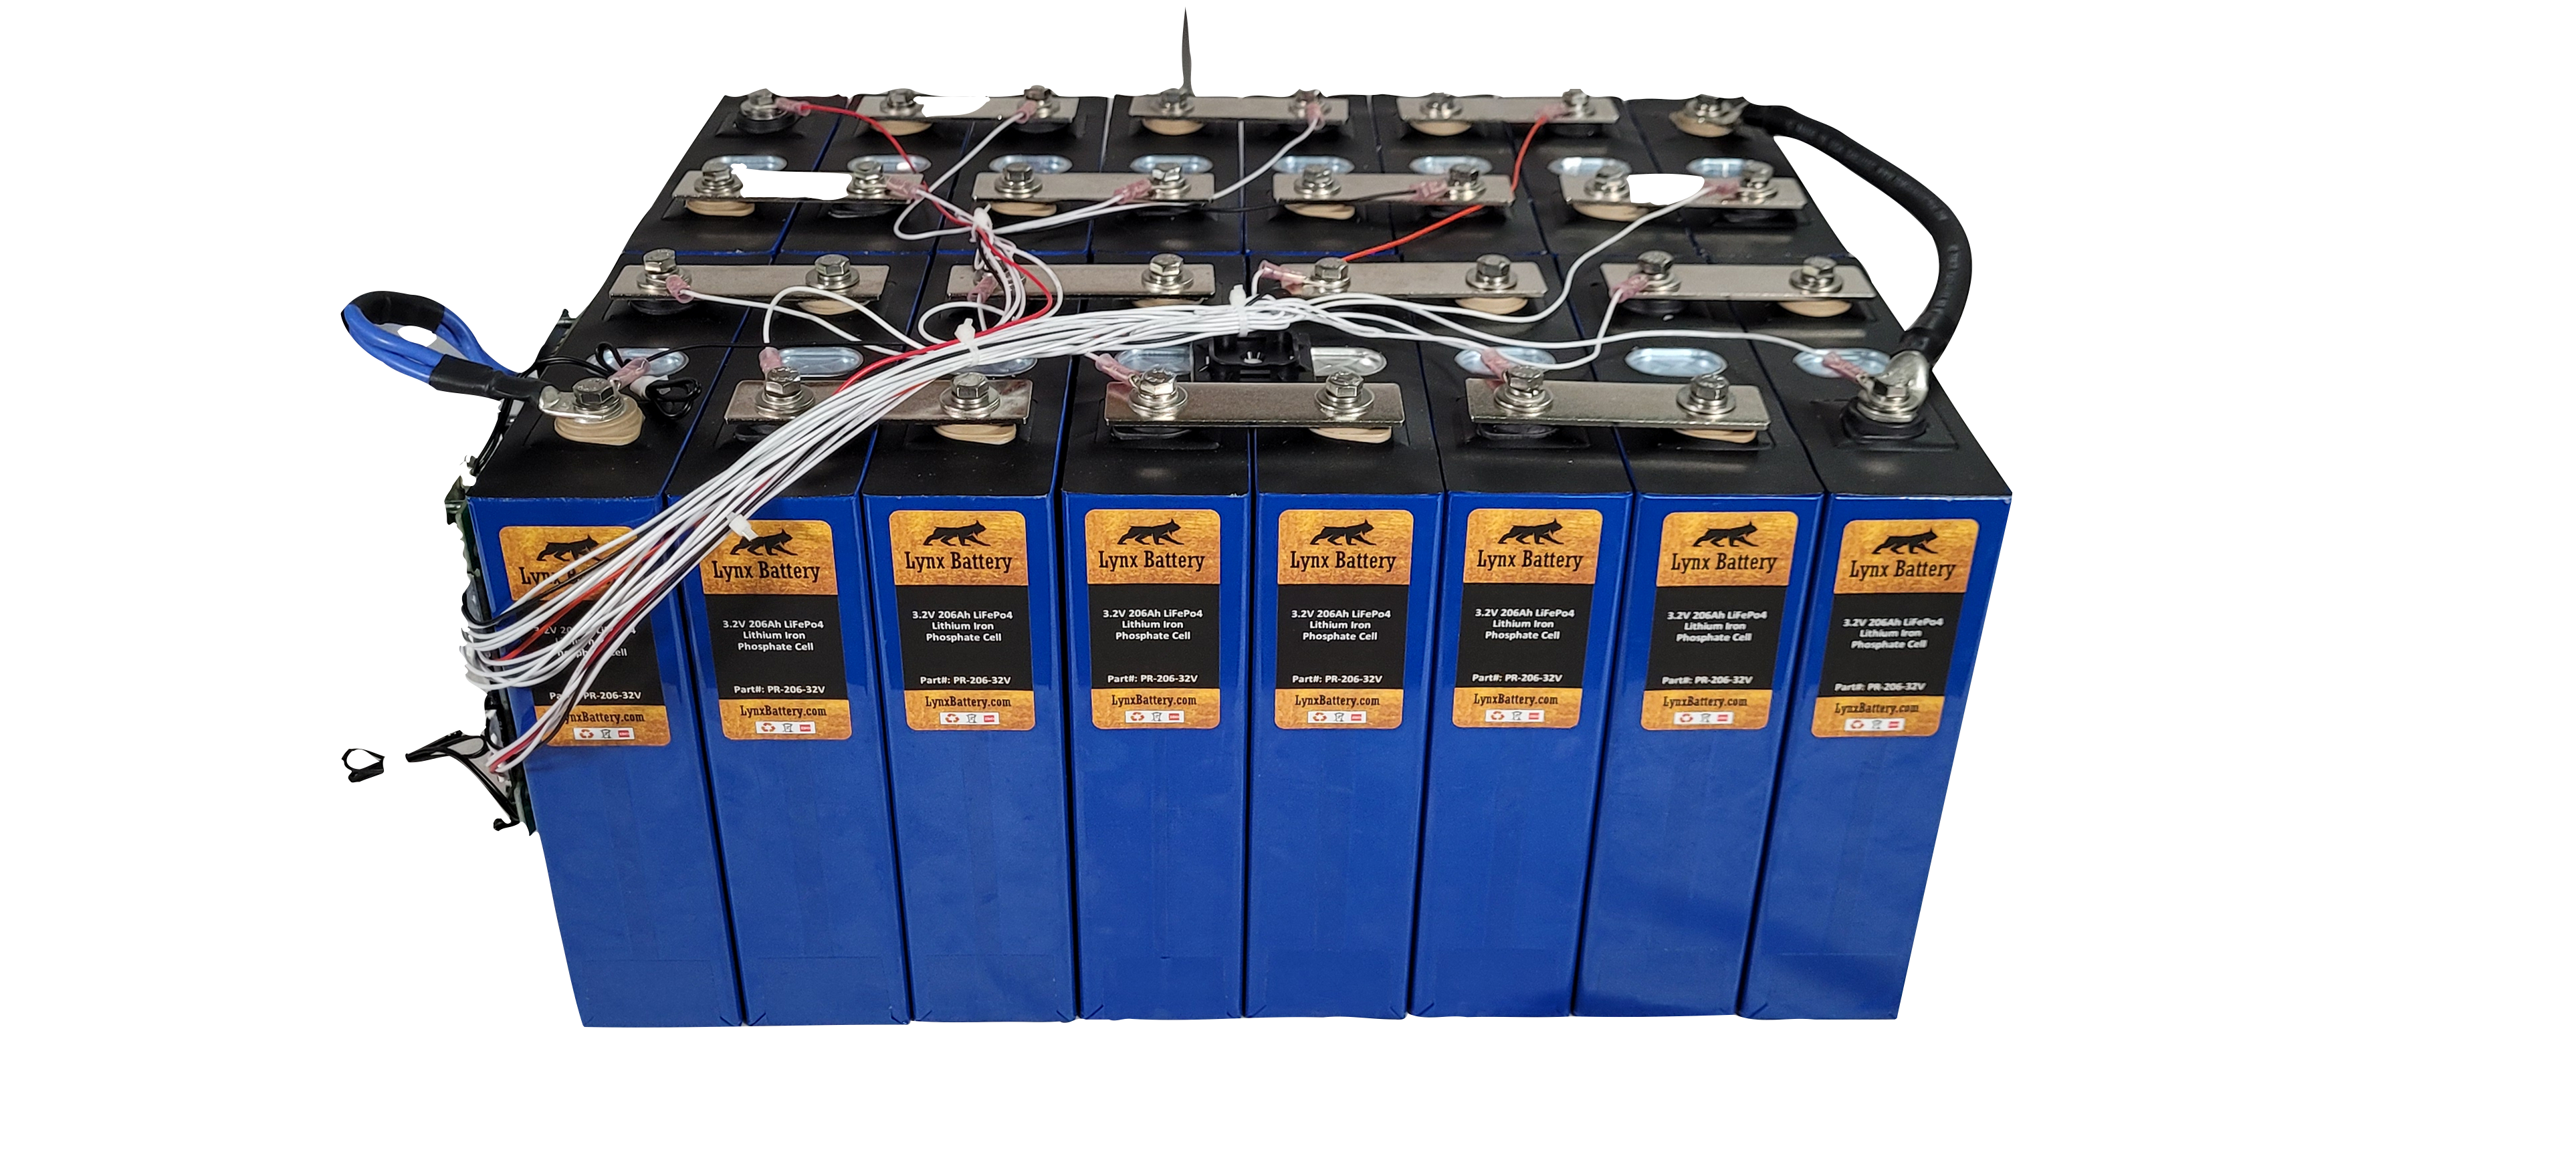 48V 200Ah Lithium Iron Phosphate (LiFePO4) Battery with 200A BMS